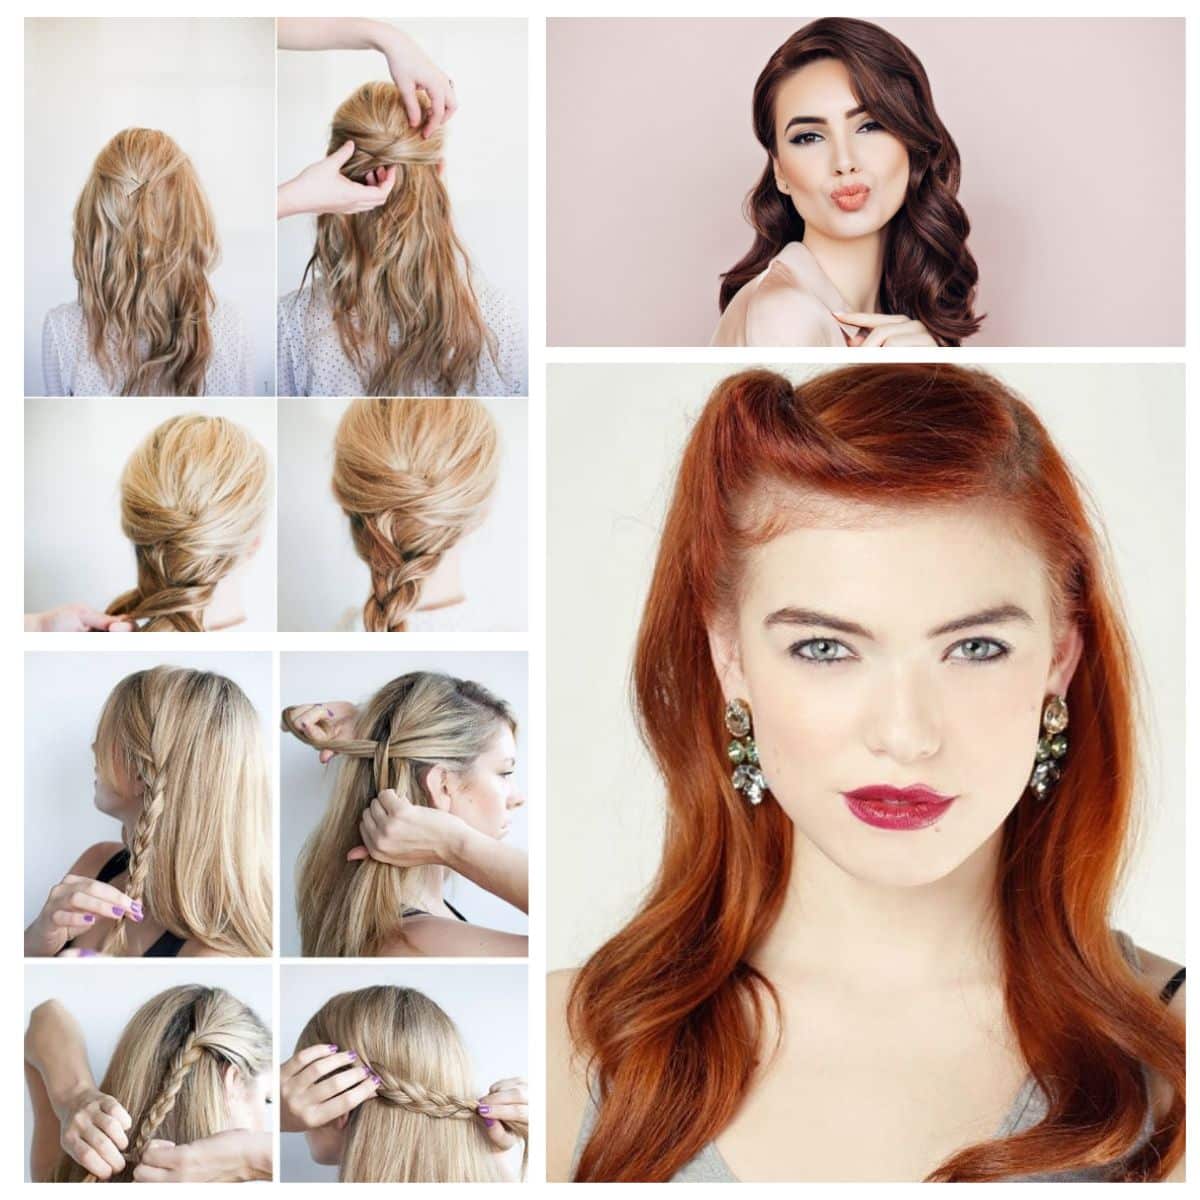 PPT - Stylish yet Easy Hairstyles Every College Girl Should Know PowerPoint  Presentation - ID:7738908